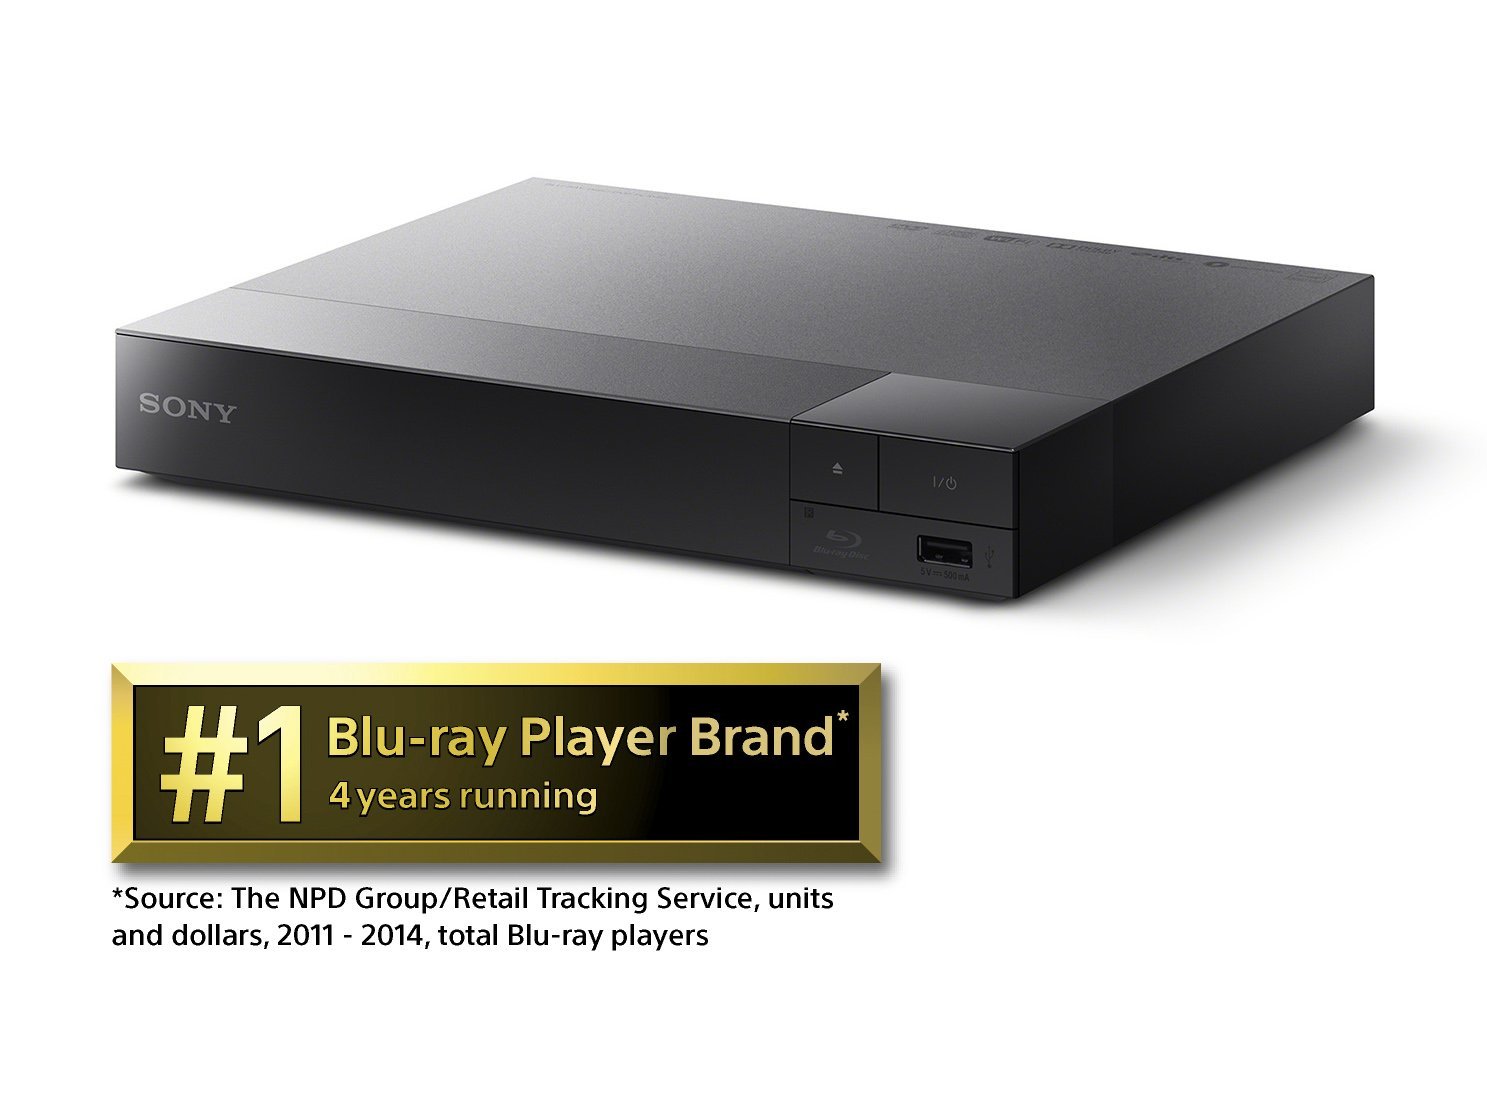 Sony BDPS3500 Streaming Blu-Ray Disc Player